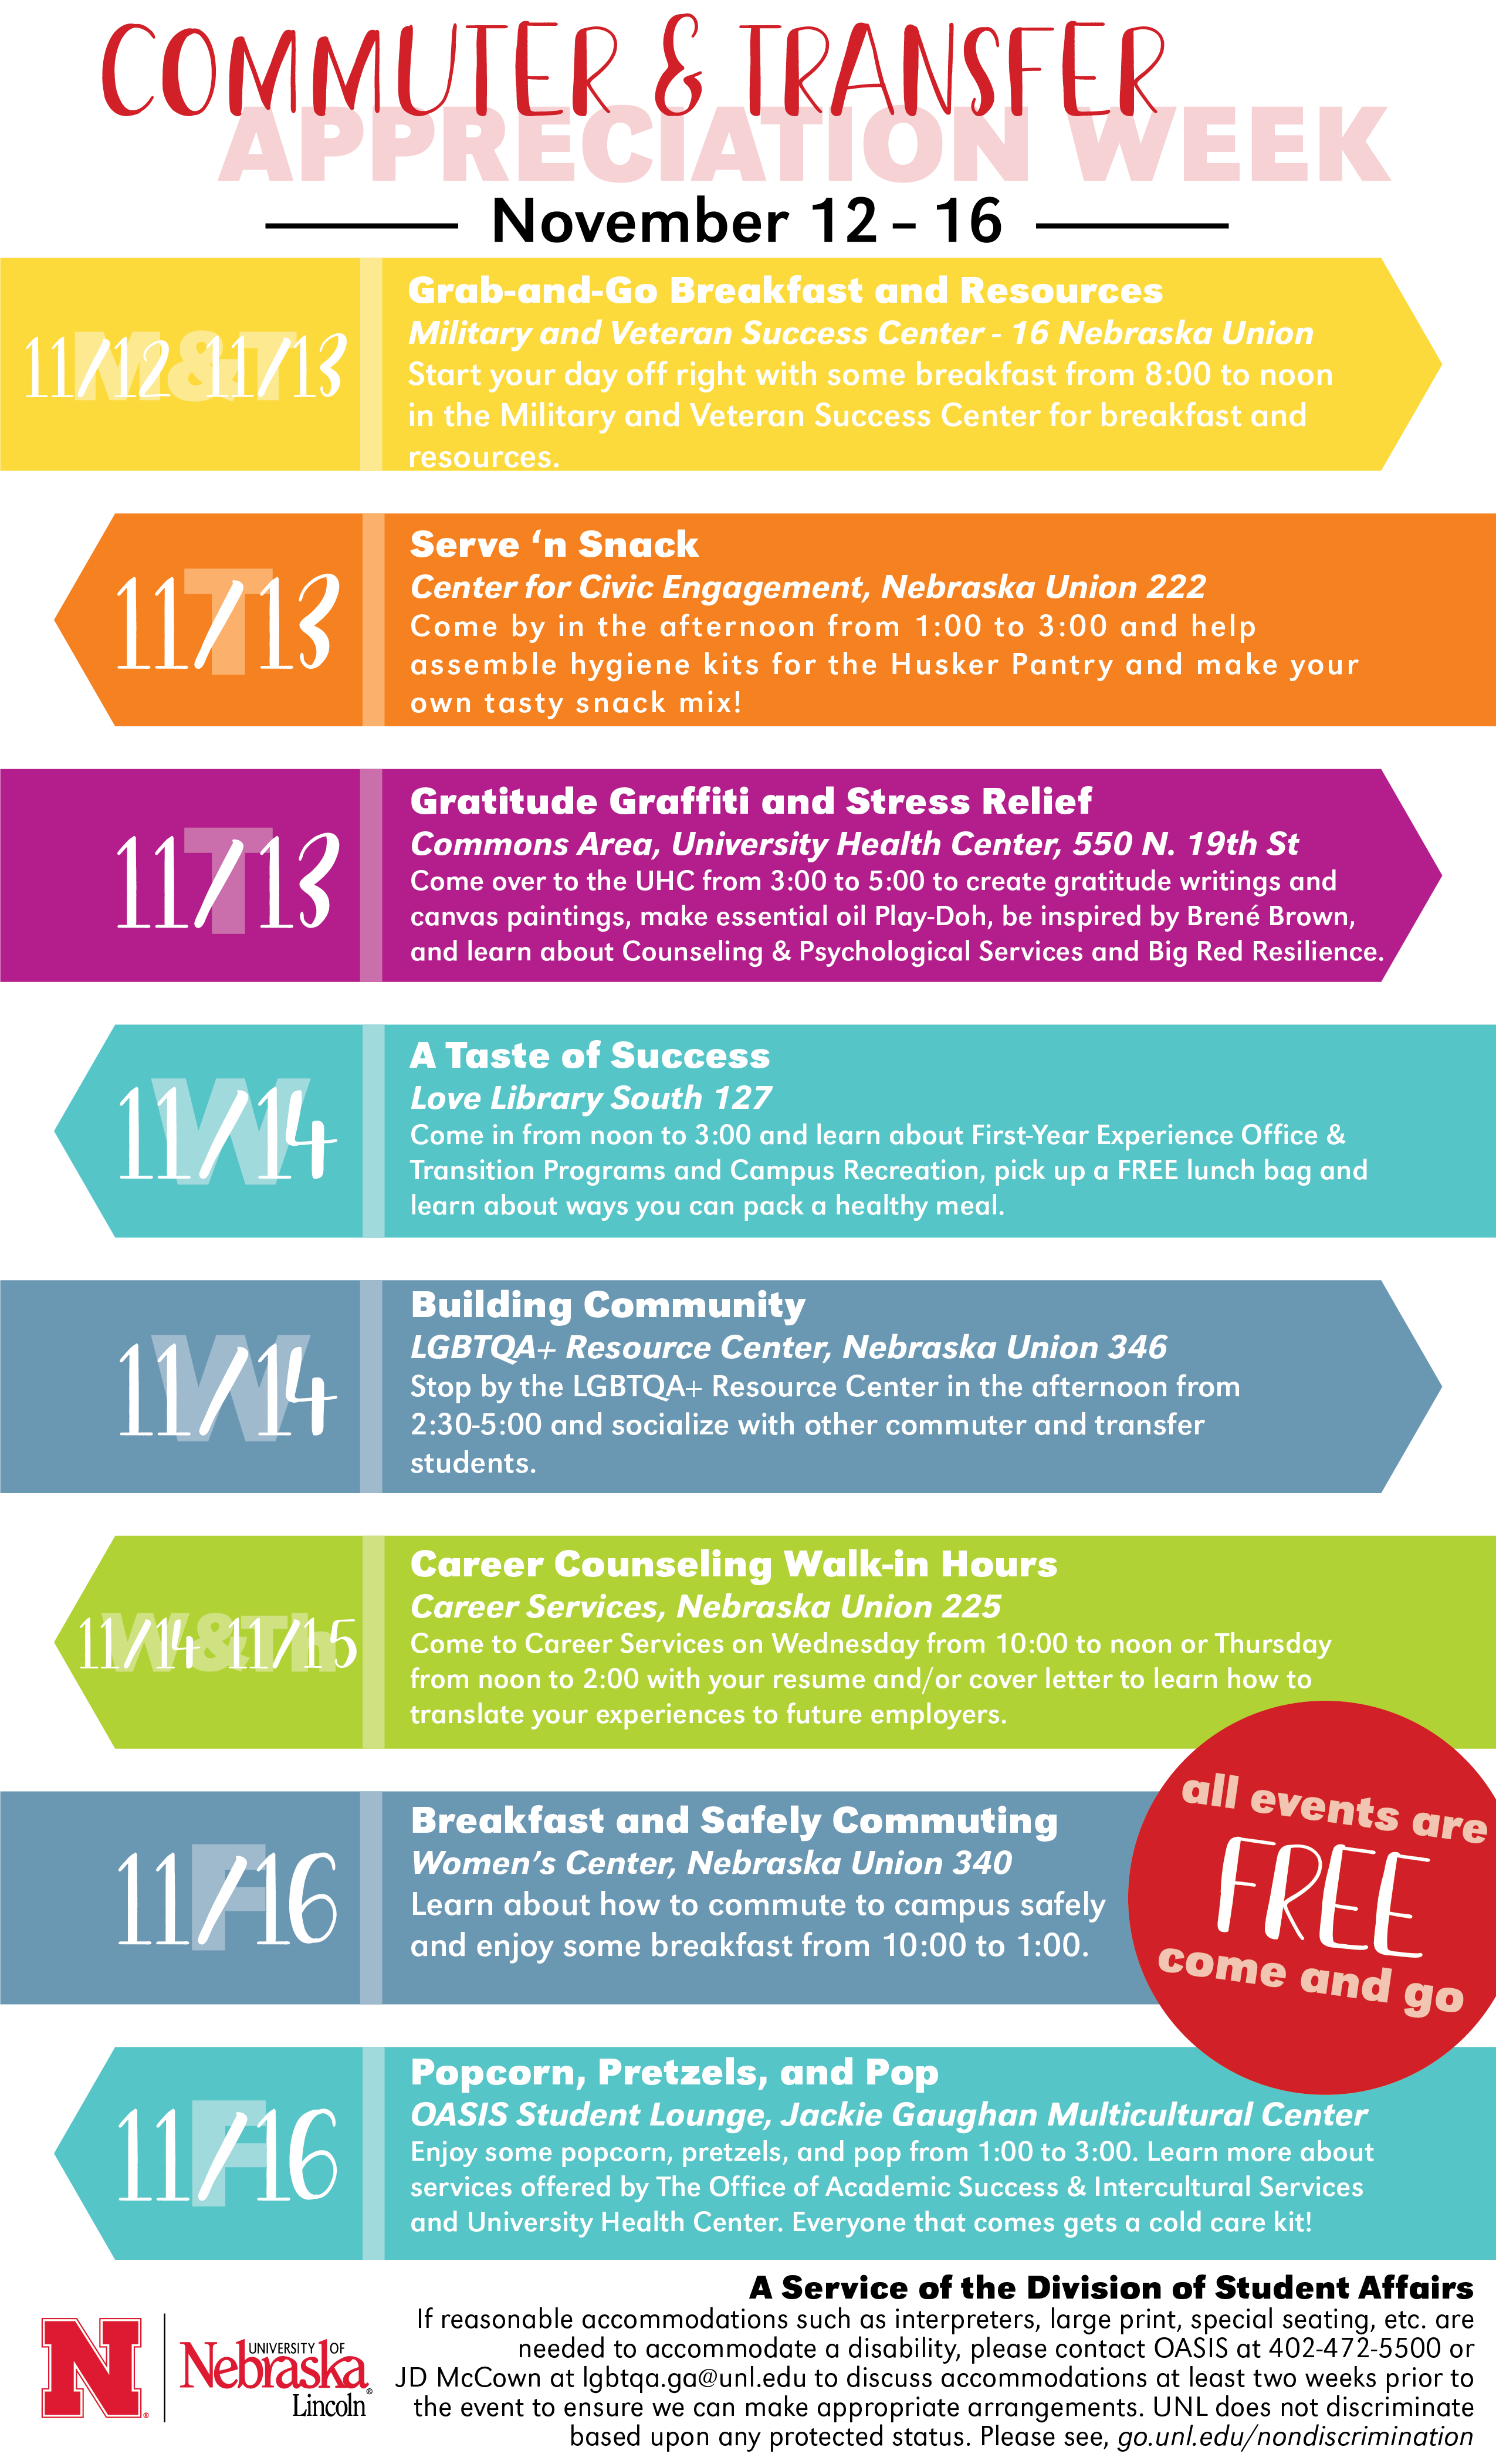 Schedule of events for Commuter & Transfer Appreciation Week. More info available at http://events.unl.edu/diversity